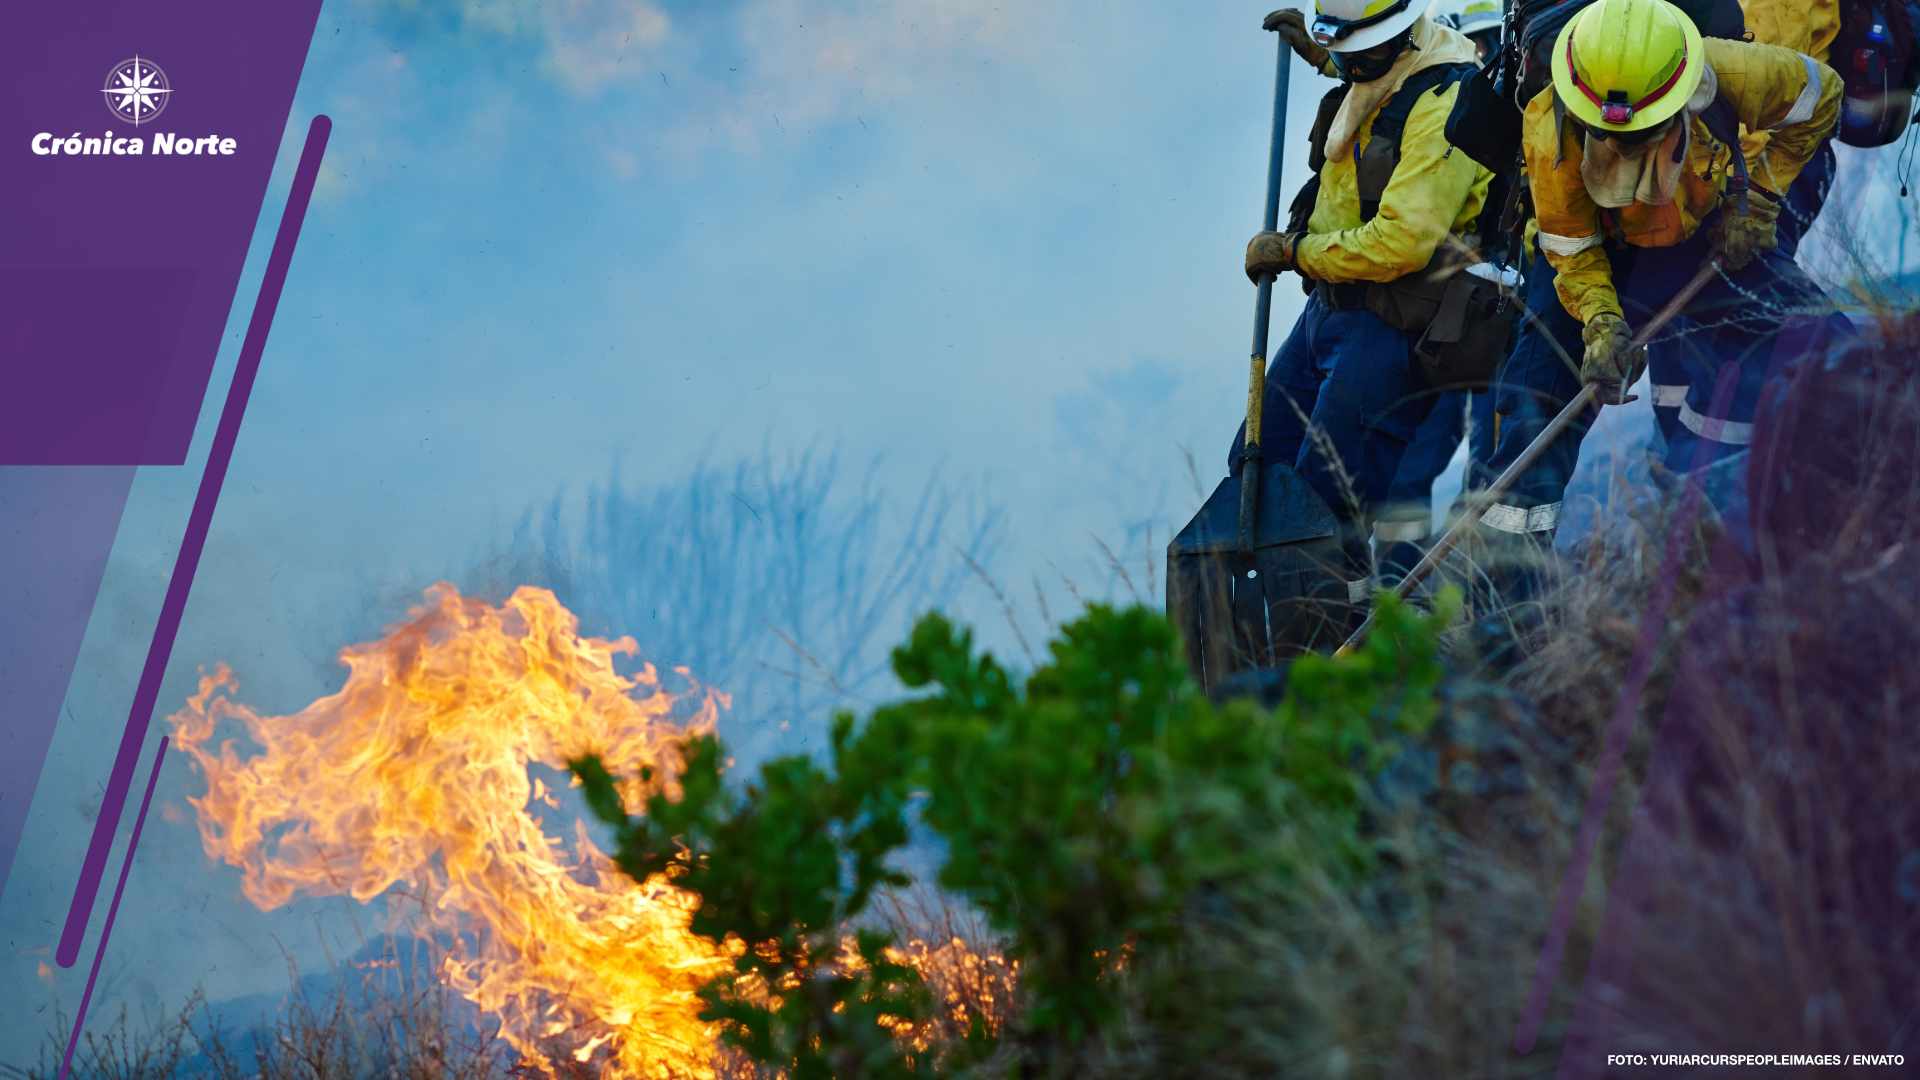 Where theres smoke, theres fire and fire fighters. Shot of fire fighters combating a wild fire